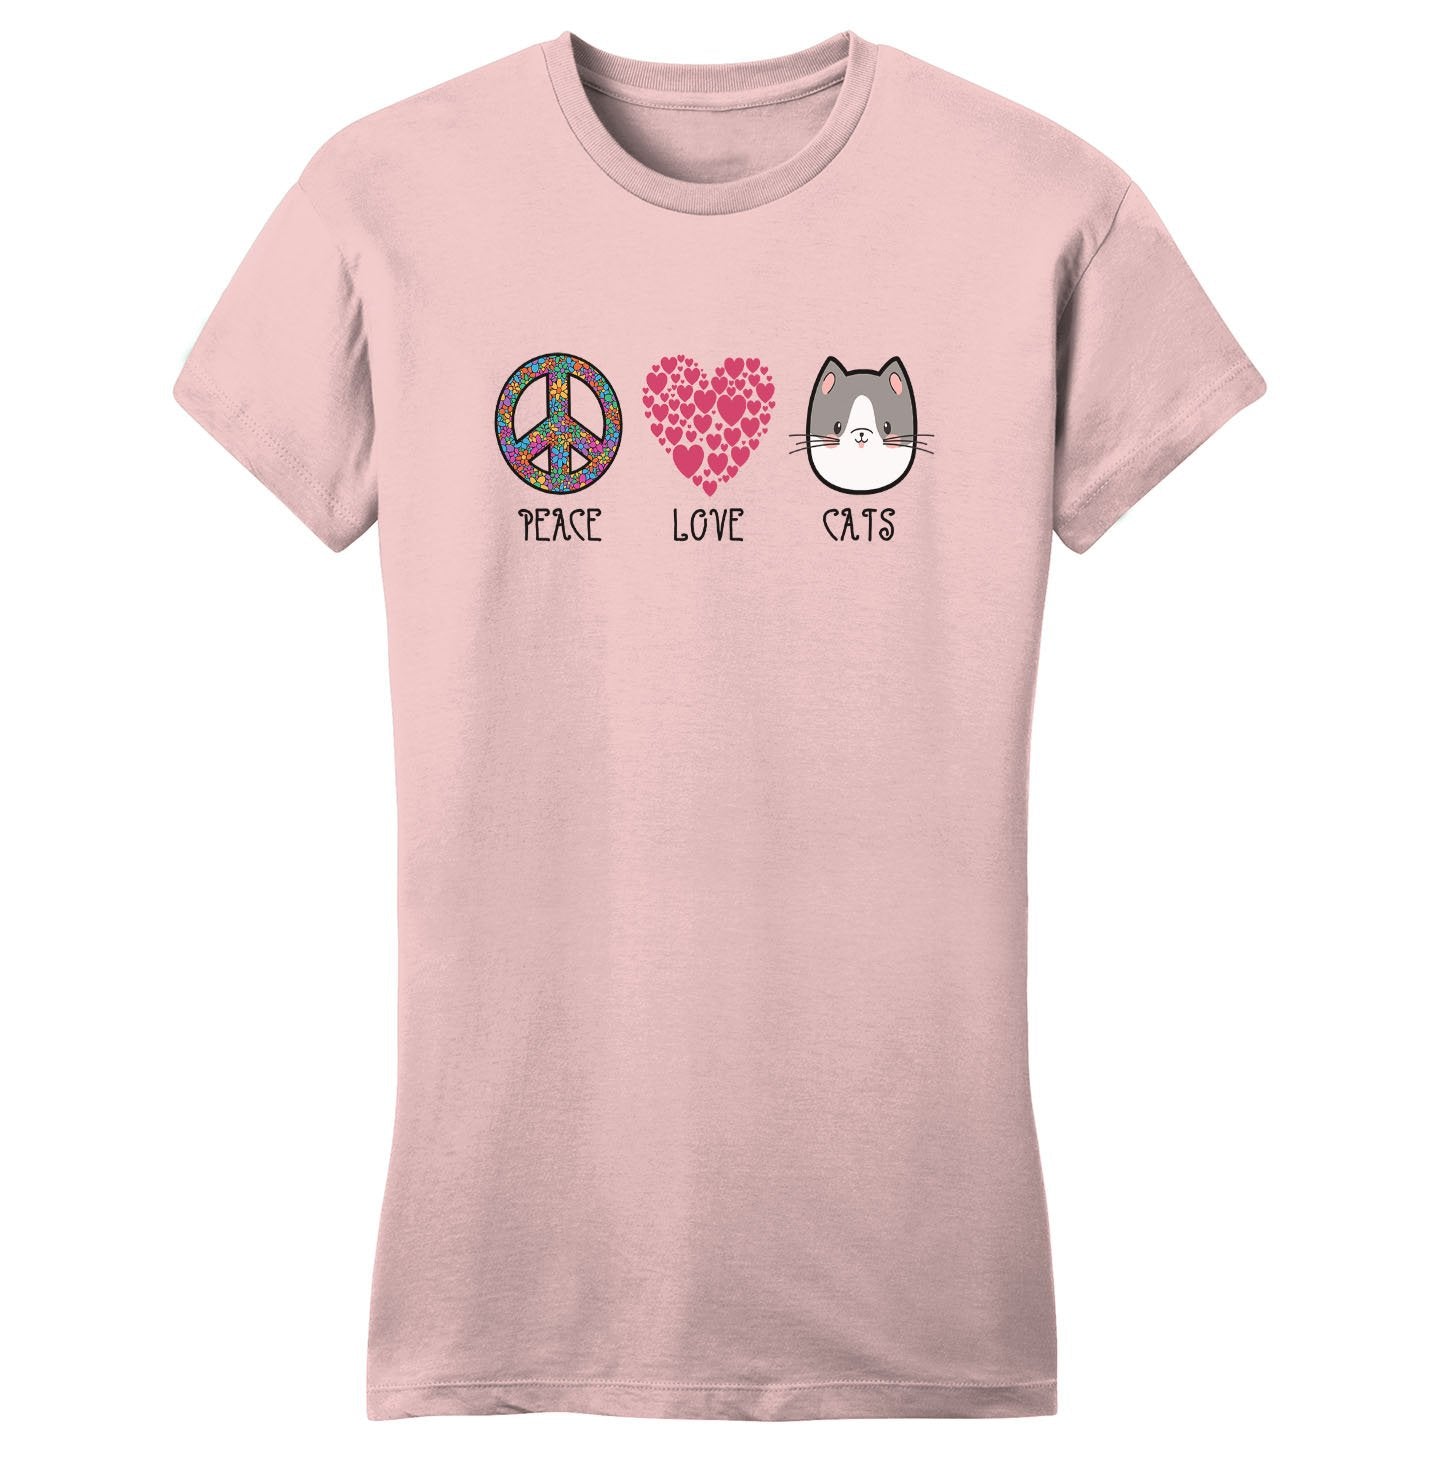 Peace Love Cats - Women's Fitted T-Shirt - Animal Tee